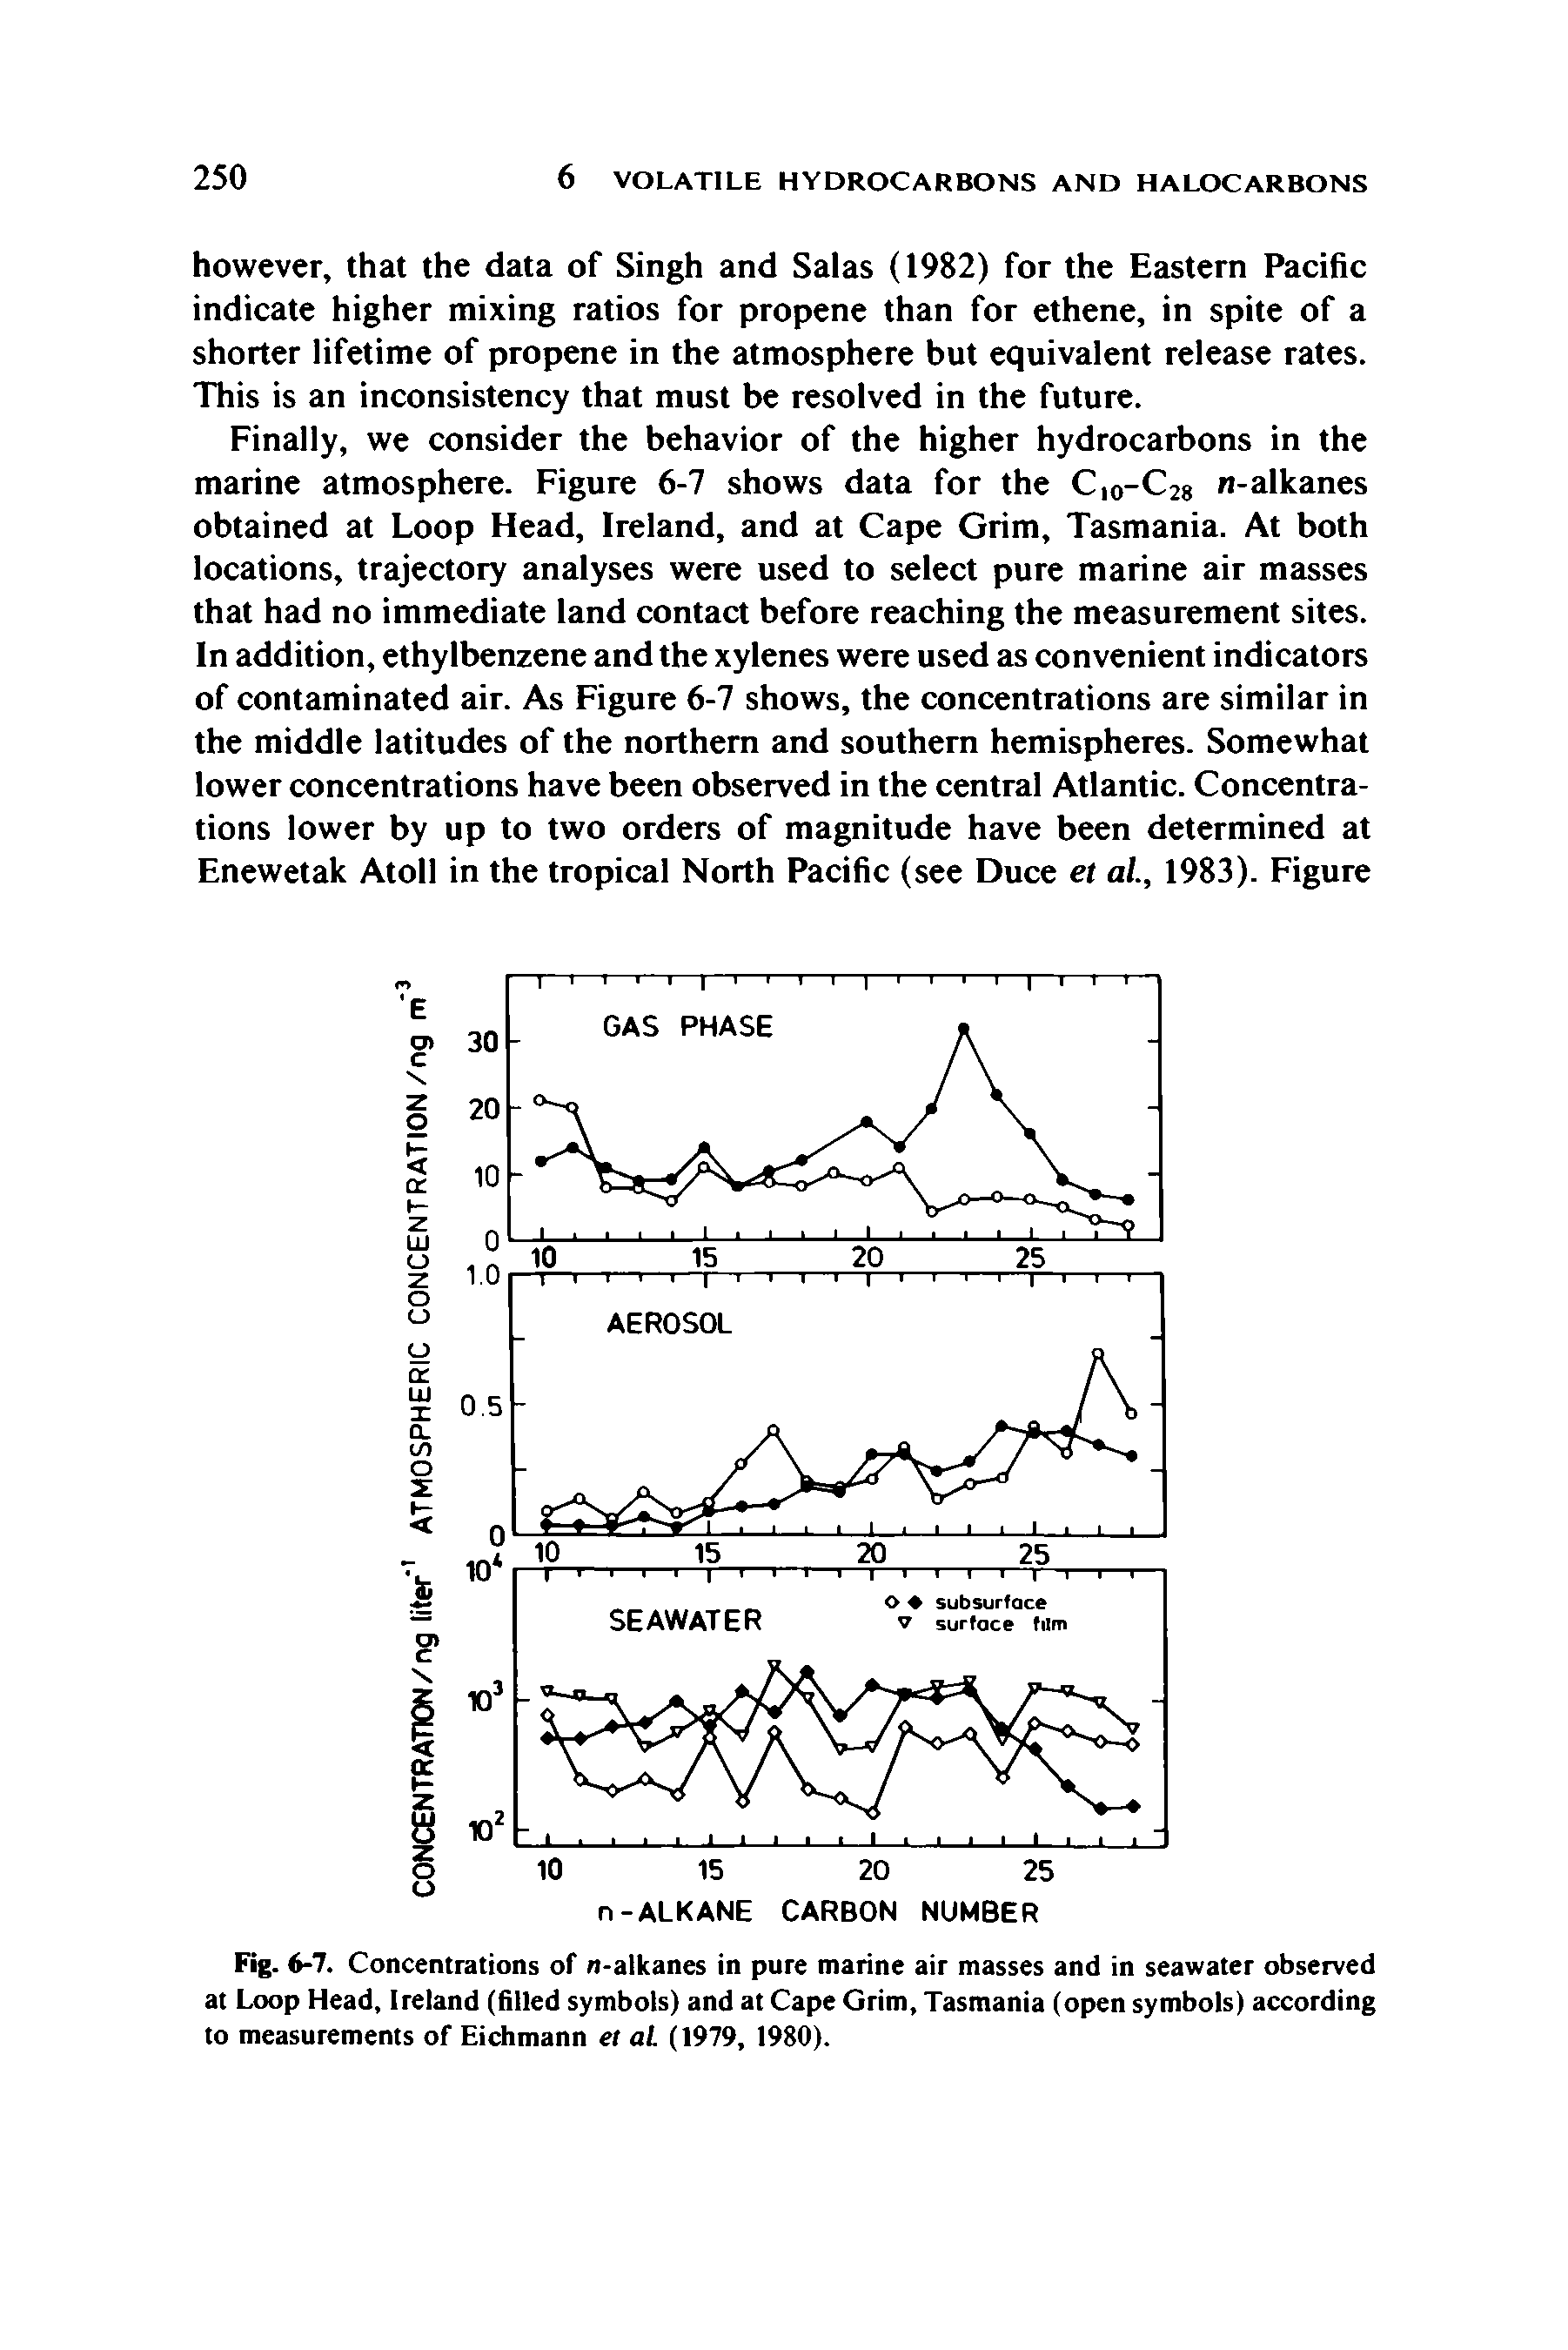 Fig. 6-7. Concentrations of n-alkanes in pure marine air masses and in seawater observed at Loop Head, Ireland (filled symbols) and at Cape Grim, Tasmania (open symbols) according to measurements of Eichmann et aL (1979, 1980).